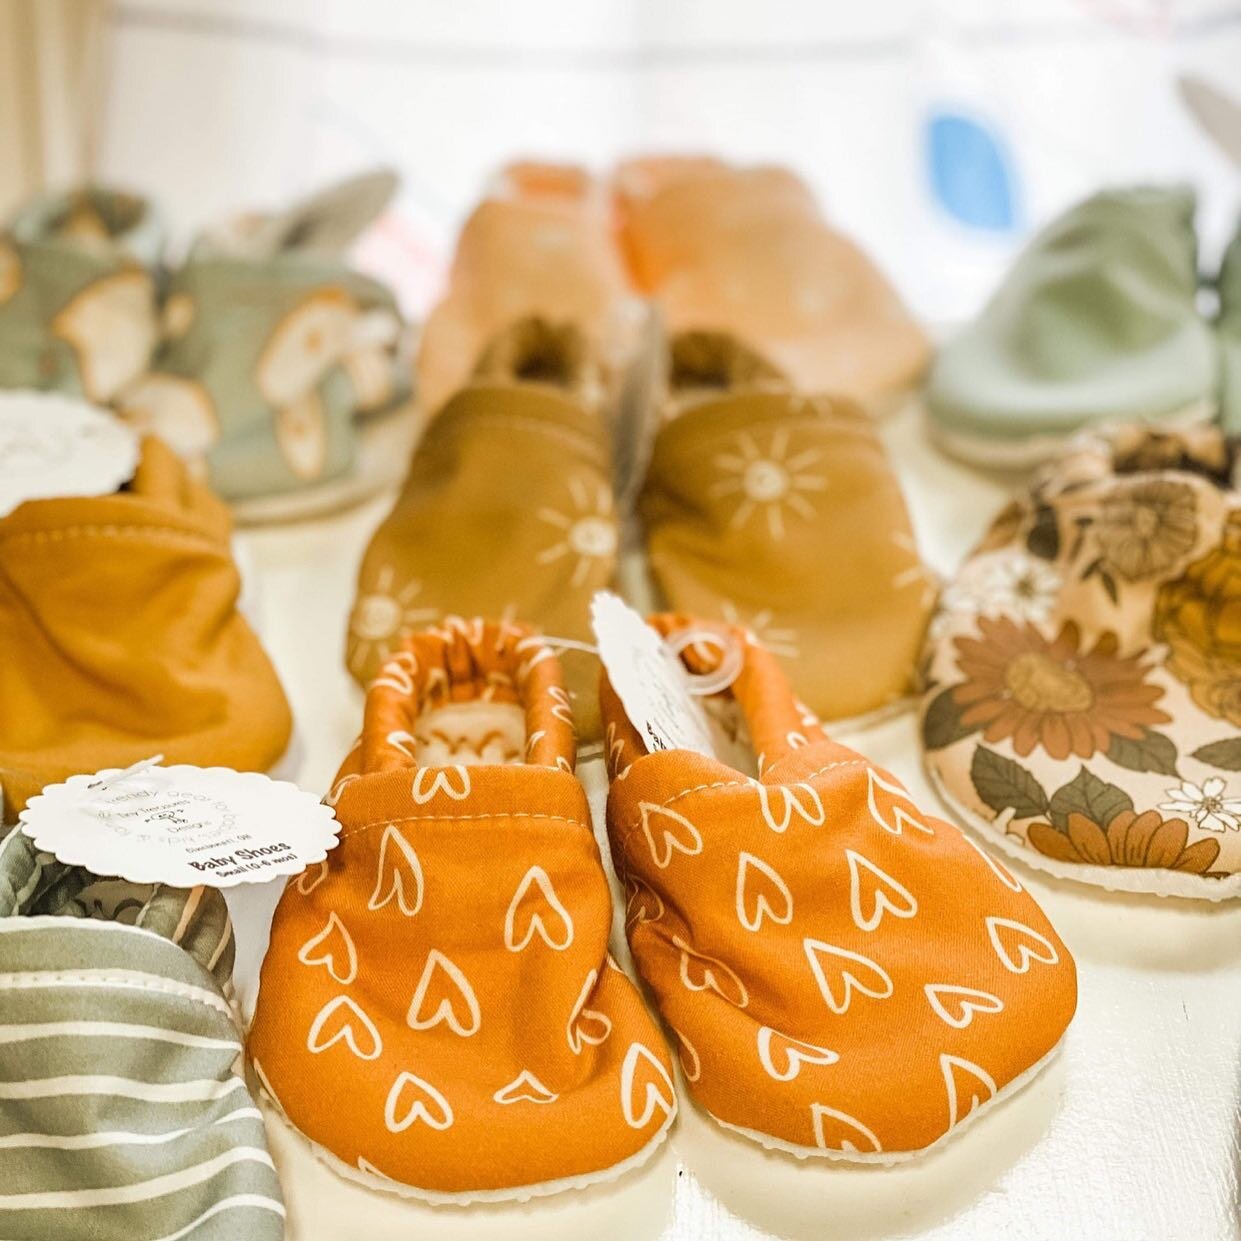 Have you seen our baby shoes and bibs in the latest prints? Made in Ohio by @tinytreasuresdesigns !